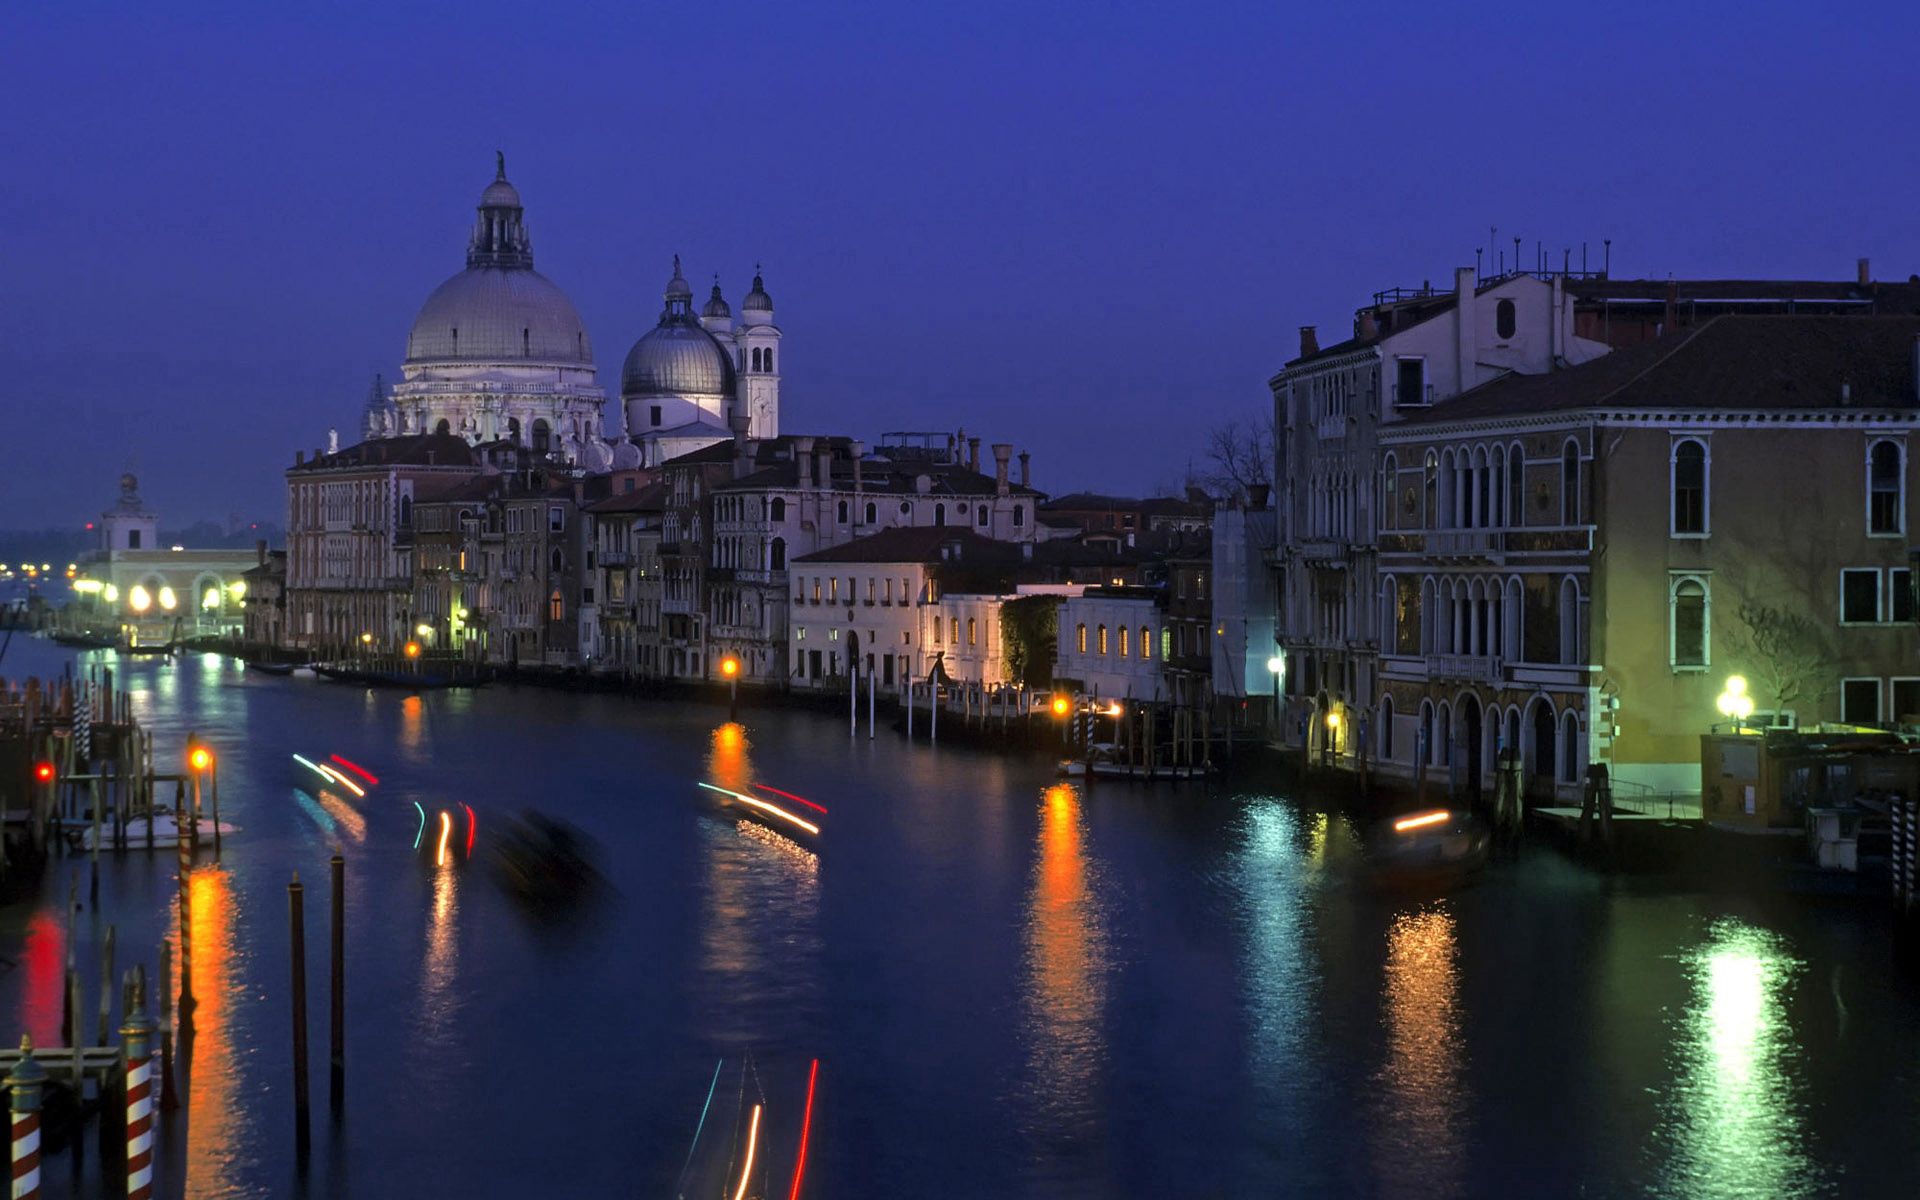 138893 download wallpaper bright, cities, water, houses, night, architecture, italy, venice, city, building, lights, shine, light, night city, illumination, lighting, dome, buildings, built, city on the water, domes screensavers and pictures for free